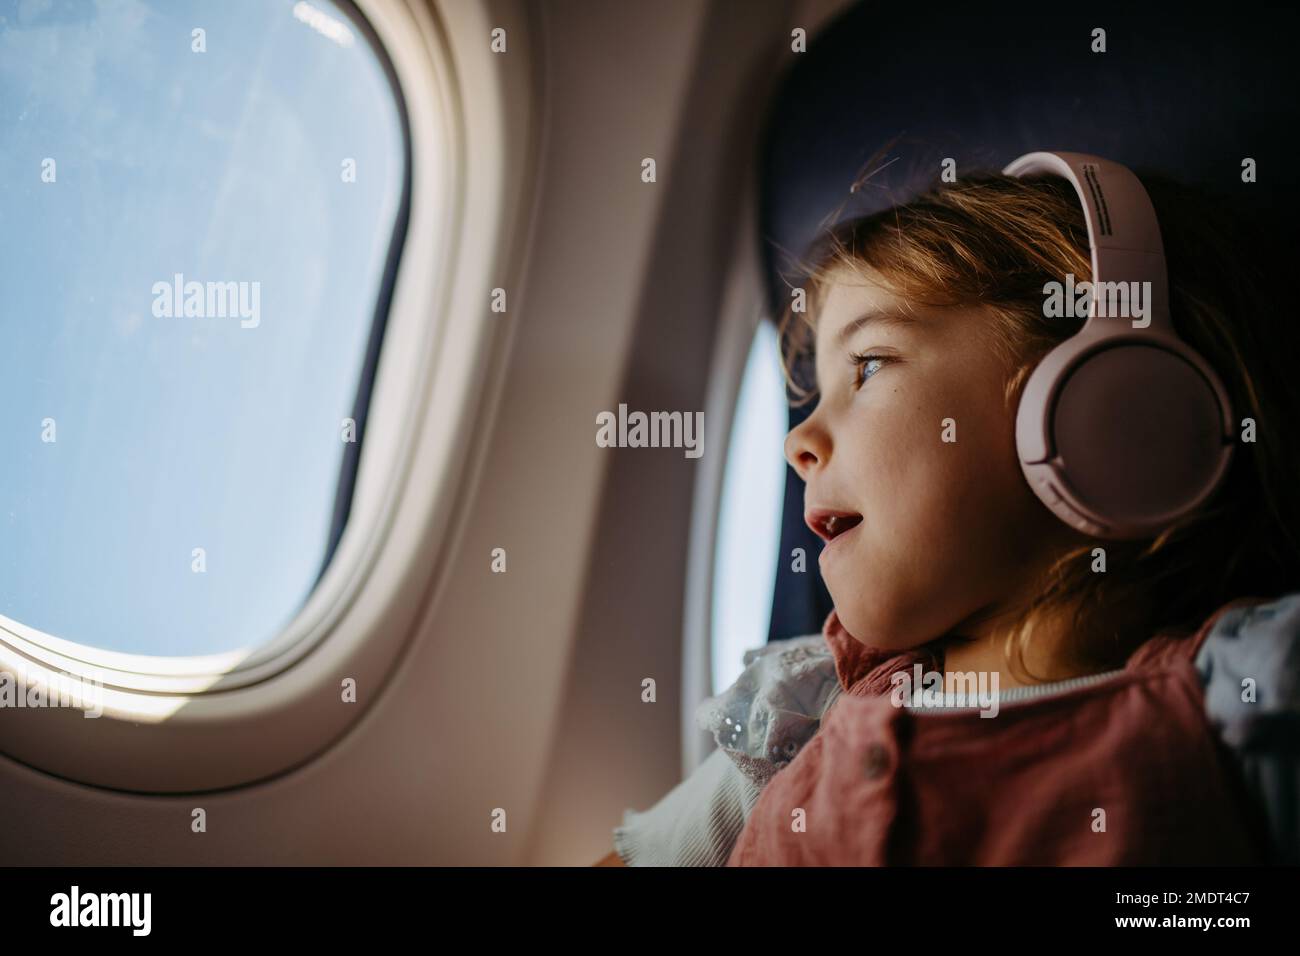 Little girl in airplane looking out of the window. Stock Photo